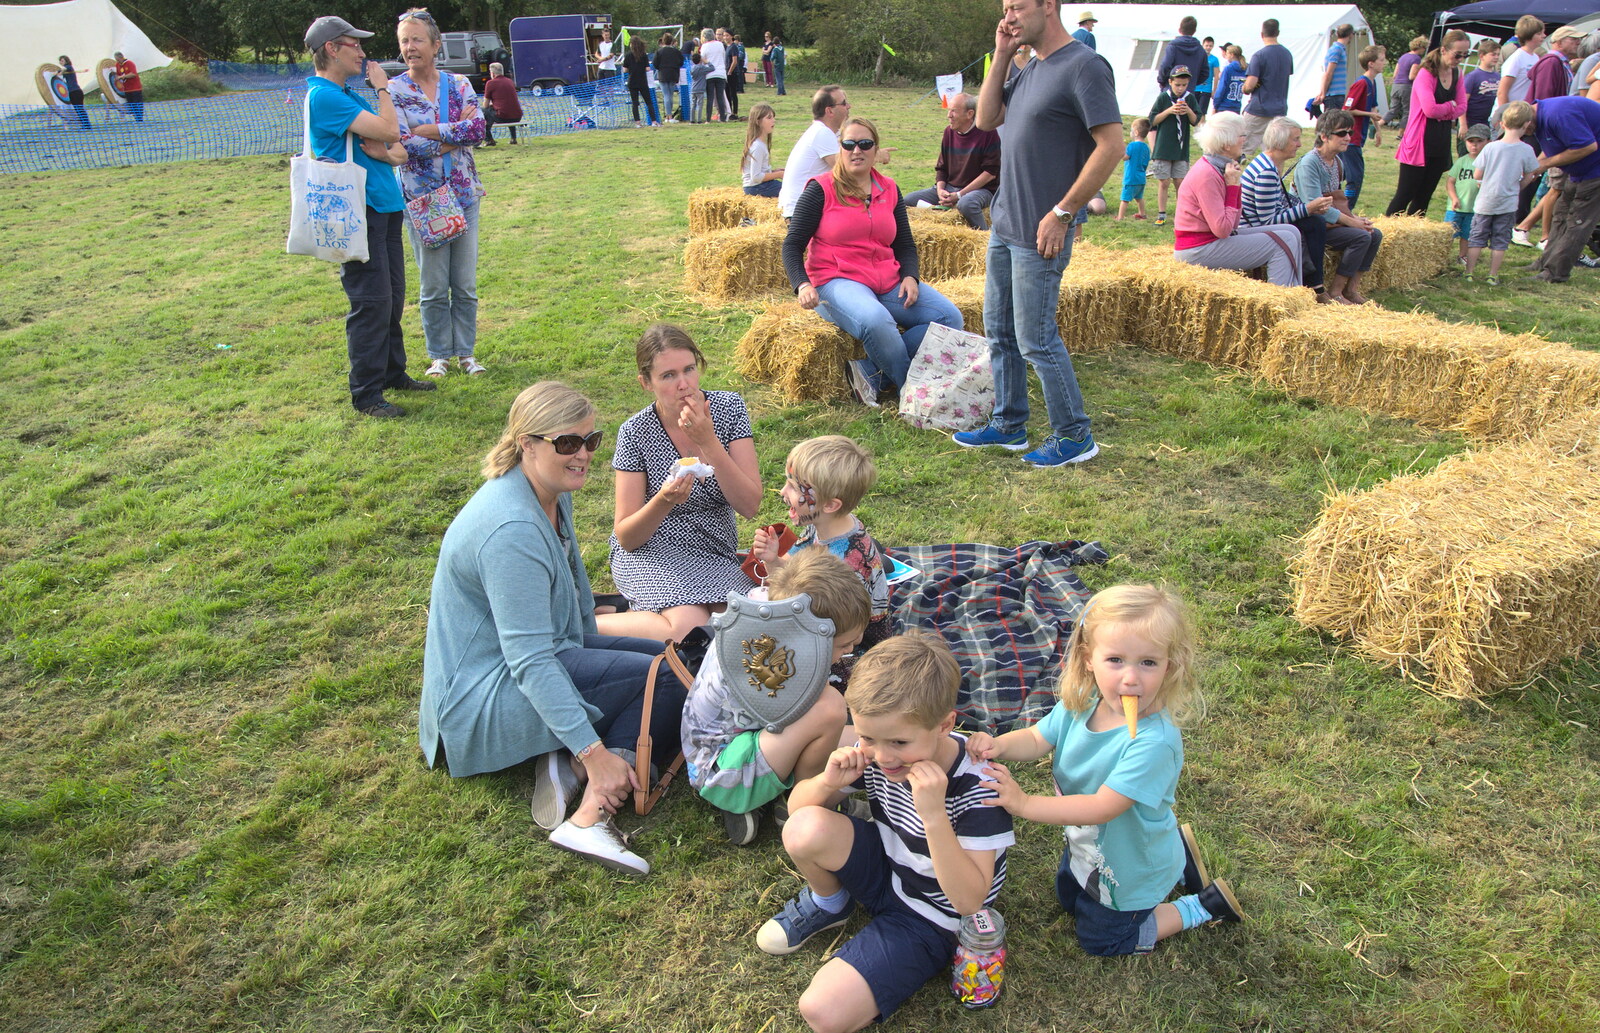 Isobel and Harry on a picnic blanket from The Eye Scouts Duck Race, The Pennings, Eye, Suffolk - 24th September 2016